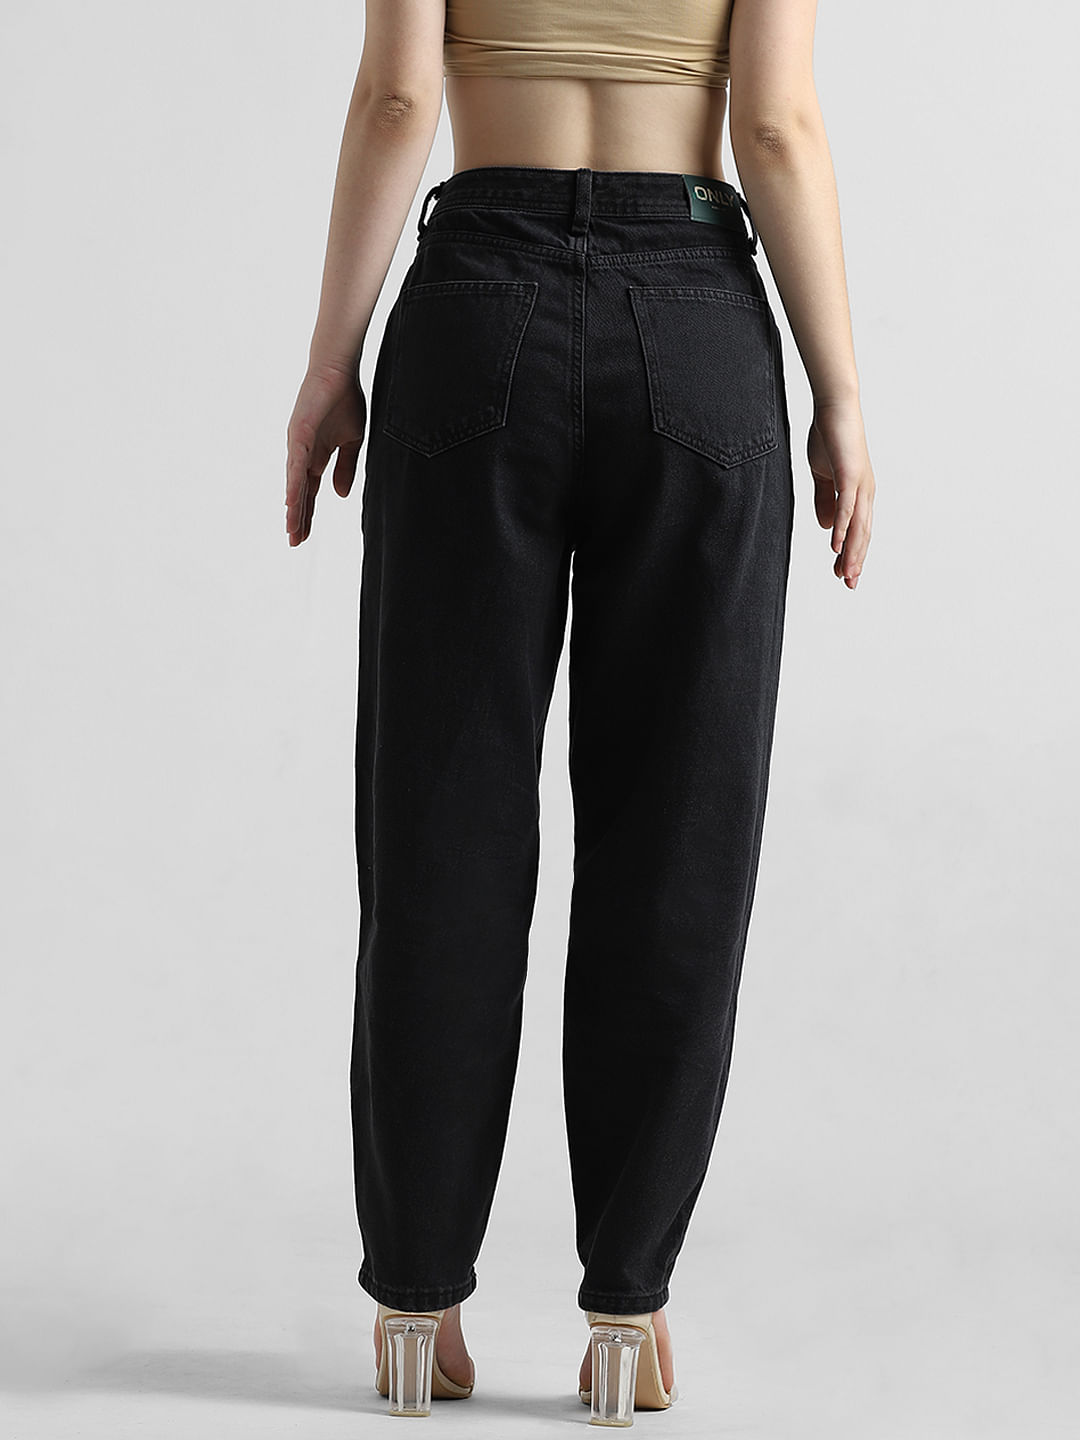 Washed Black Baggy Pants - COLORS